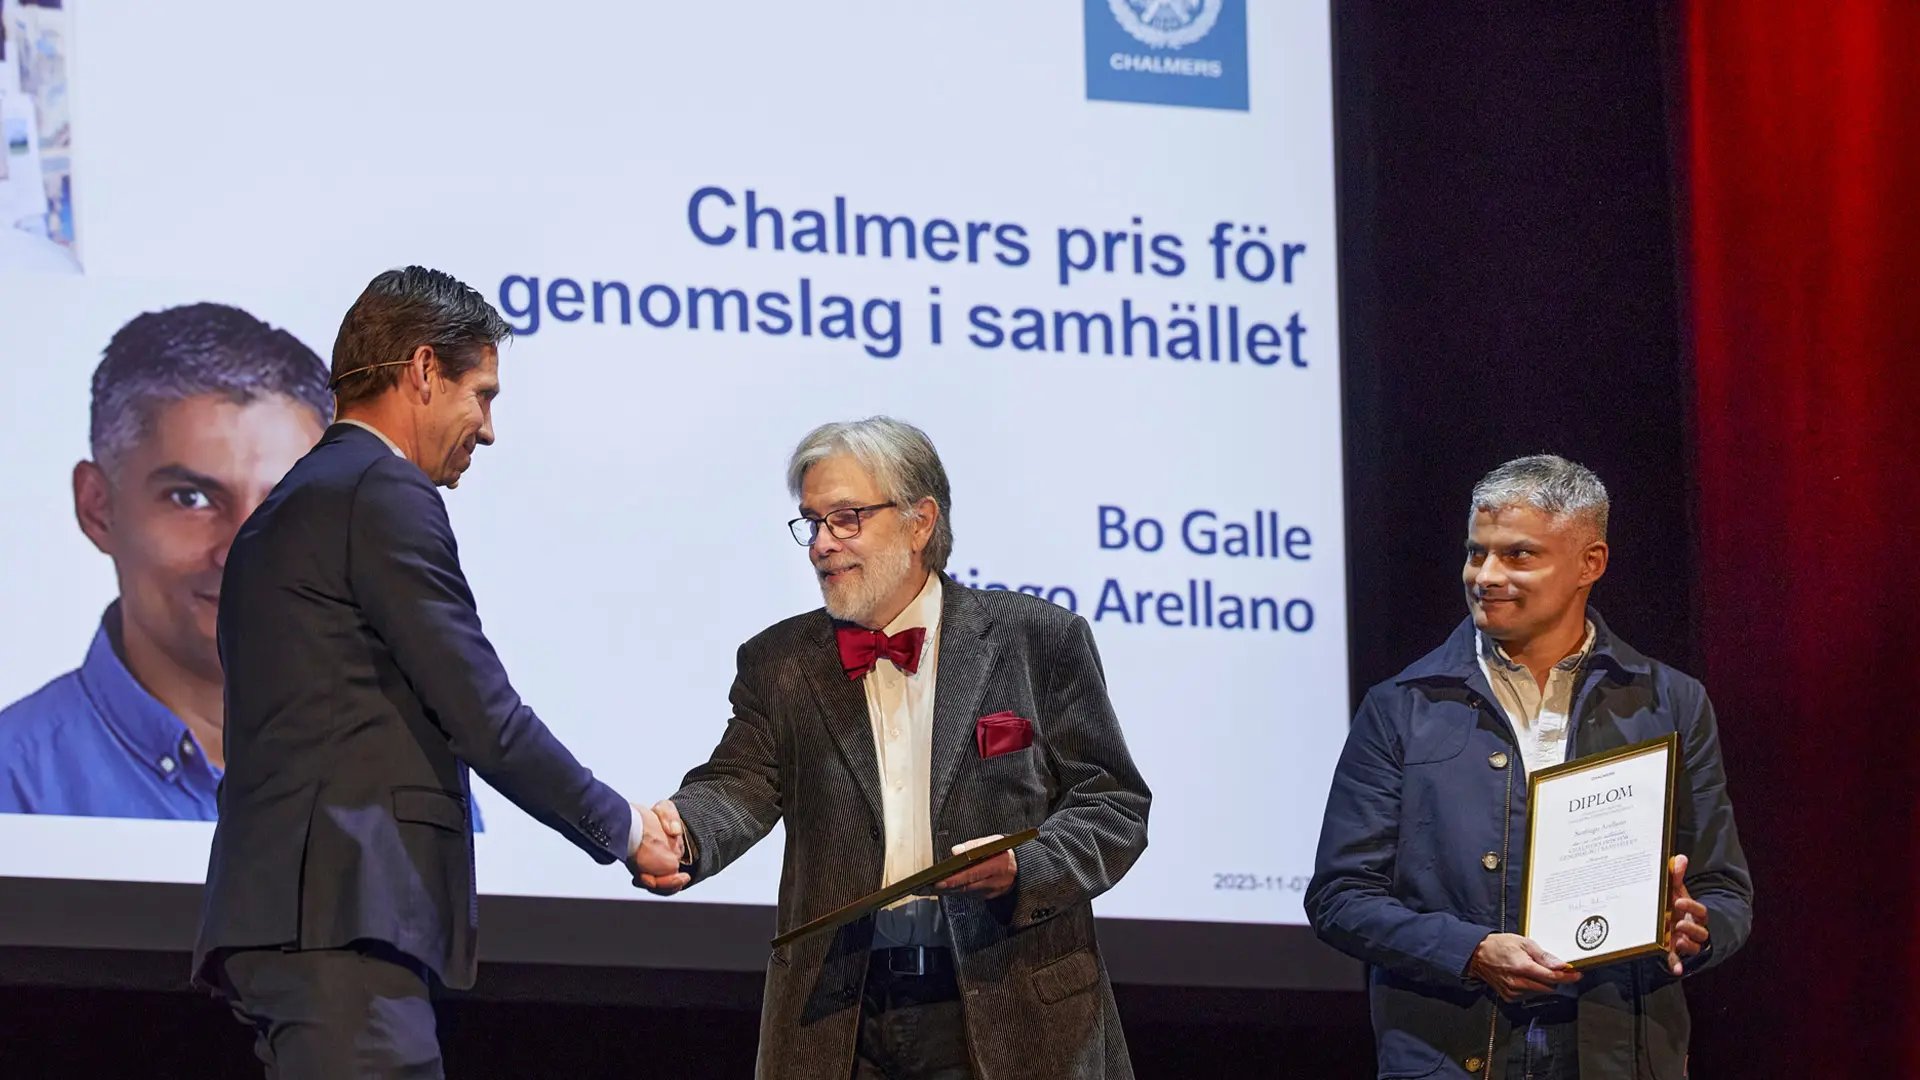 Bo Galle and Santiago Arellano are awarded the Chalmers impact award